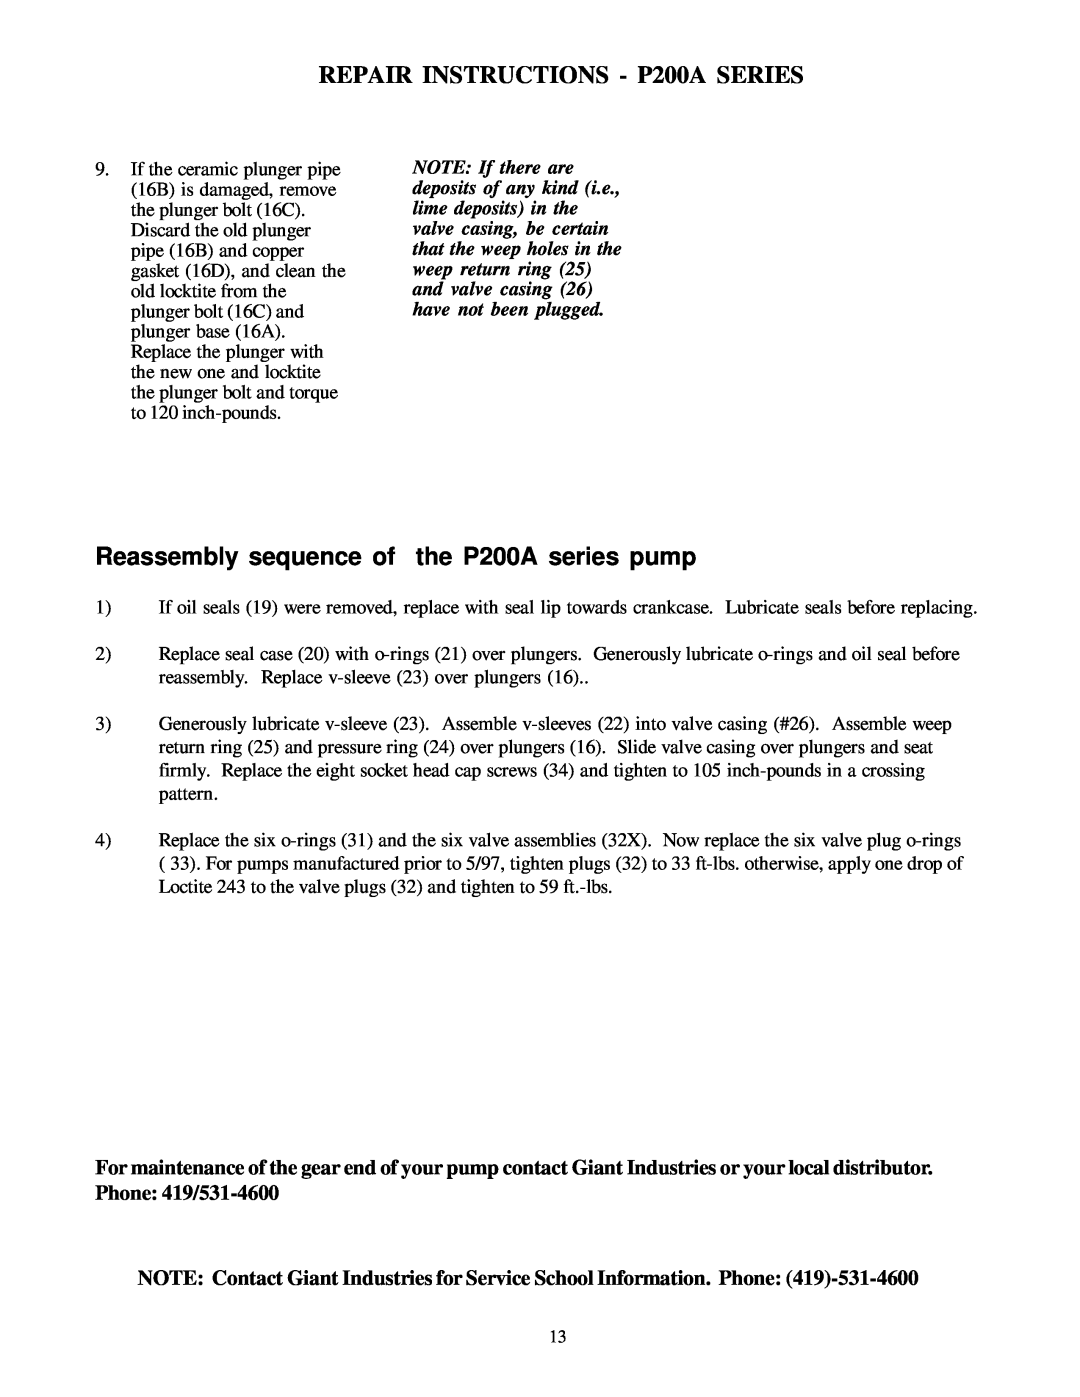 Giant P220, P219, P218, P223, P217, P221 Reassembly sequence of the P200A series pump, REPAIR INSTRUCTIONS - P200A SERIES 